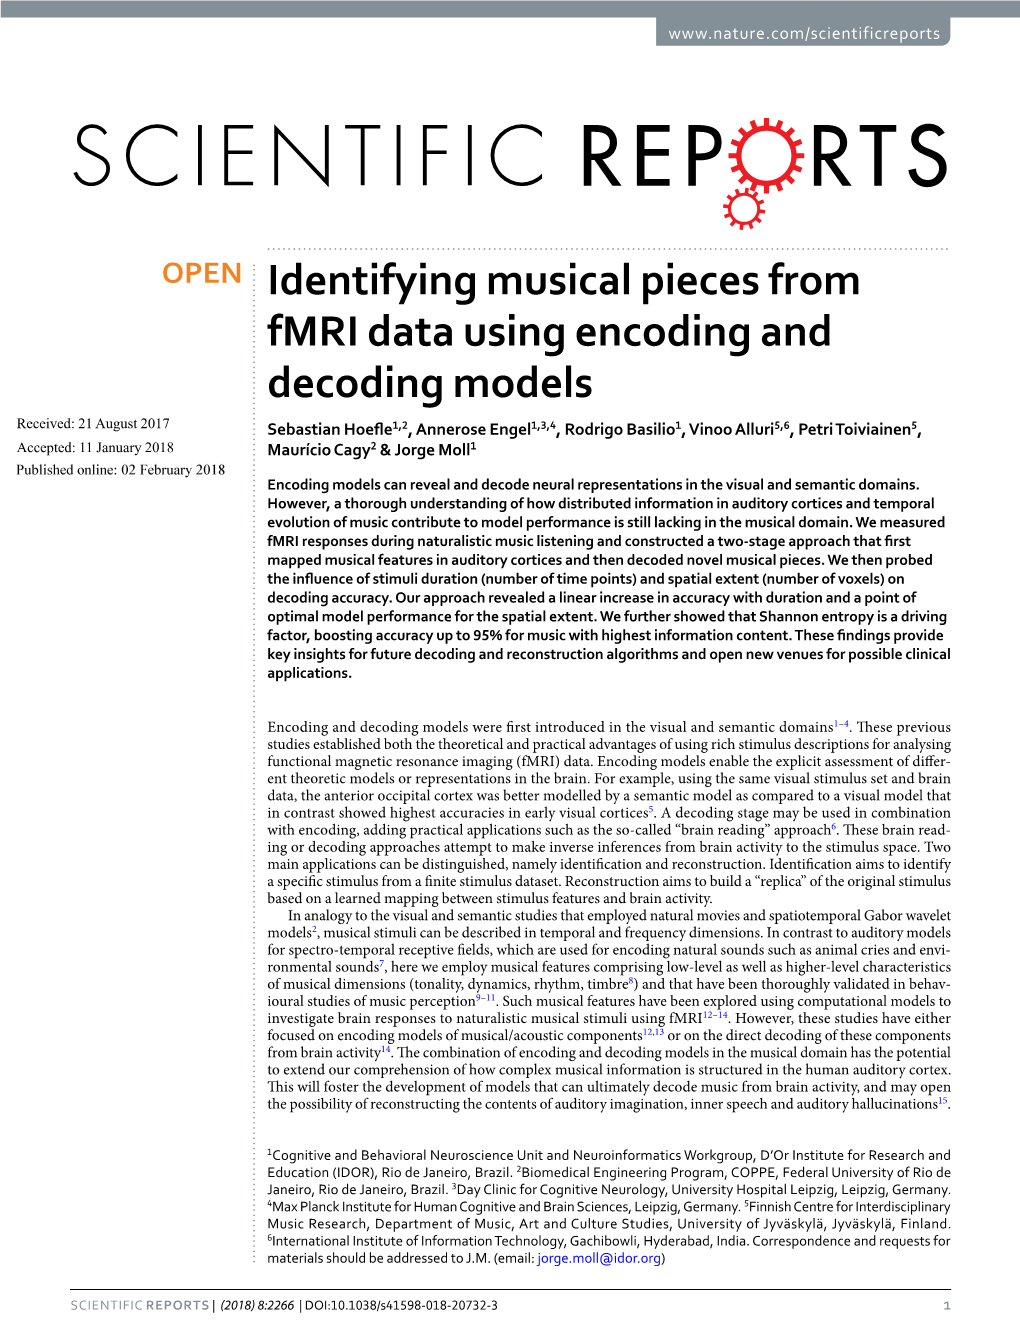 Identifying Musical Pieces from Fmri Data Using Encoding